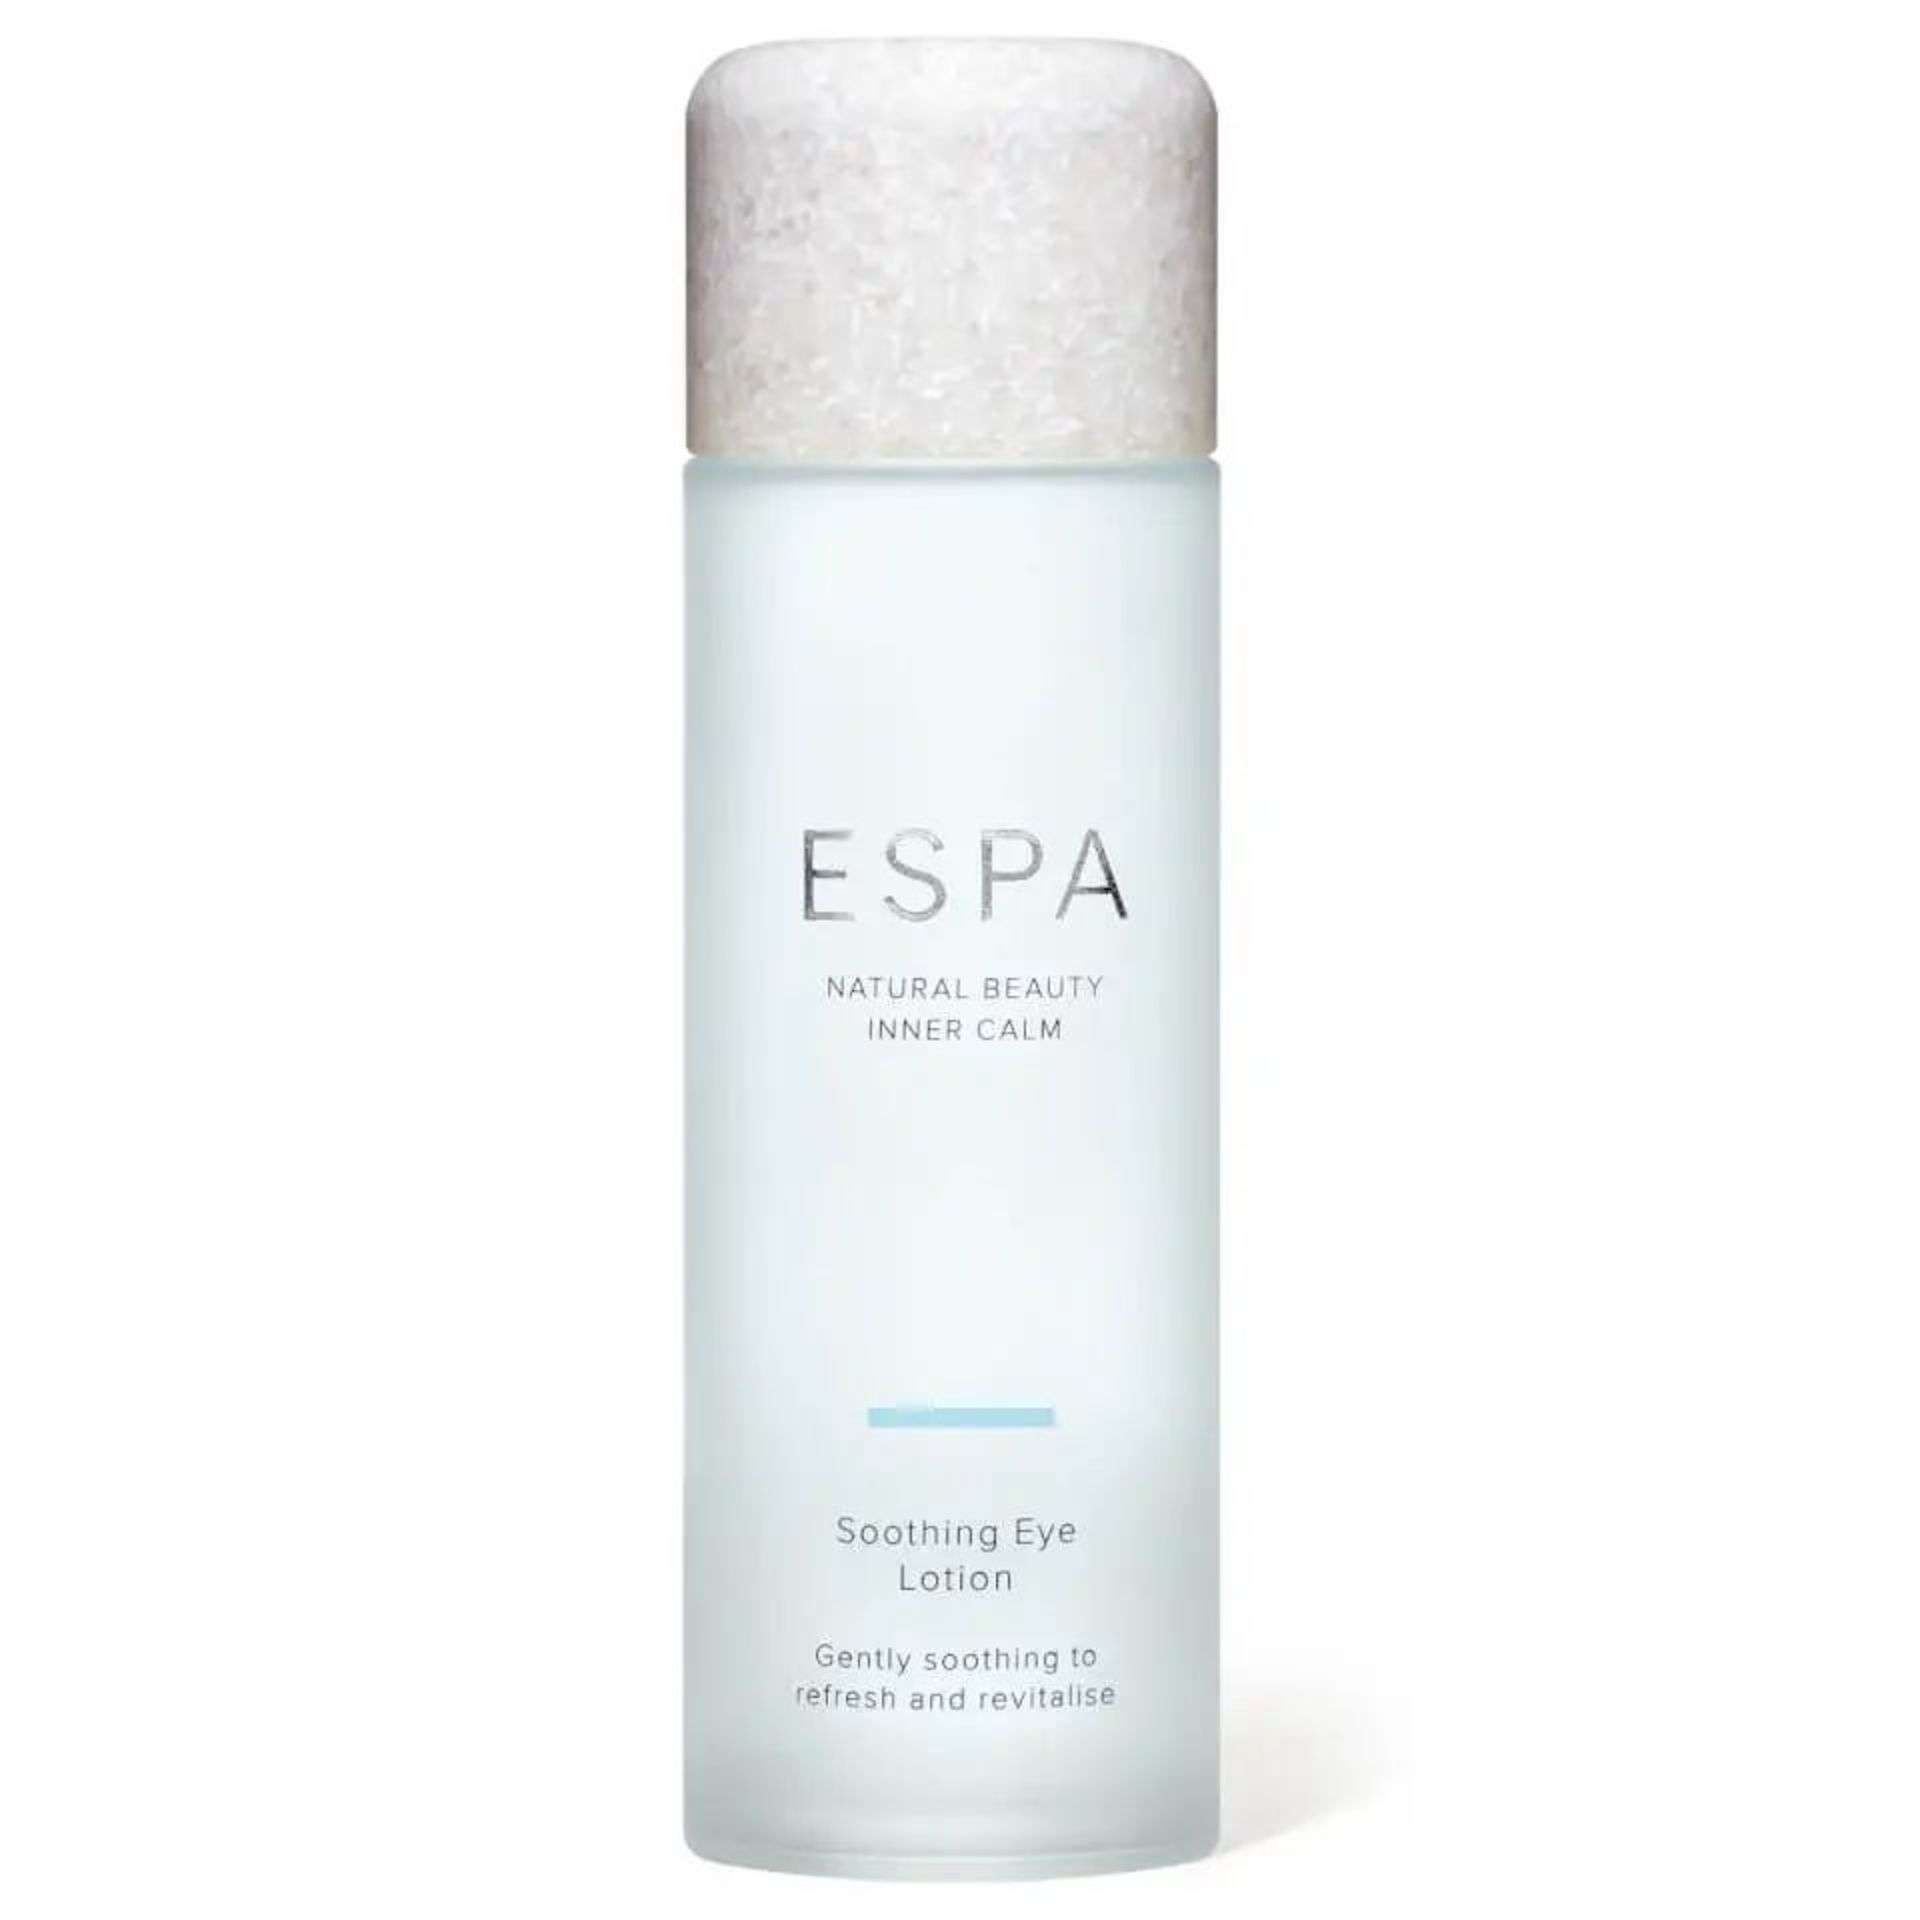 2x BRAND NEW ESPA (Professional) Soothing Eye Lotion 1000ml. RRP £180 EACH. (R12-16). A soothing